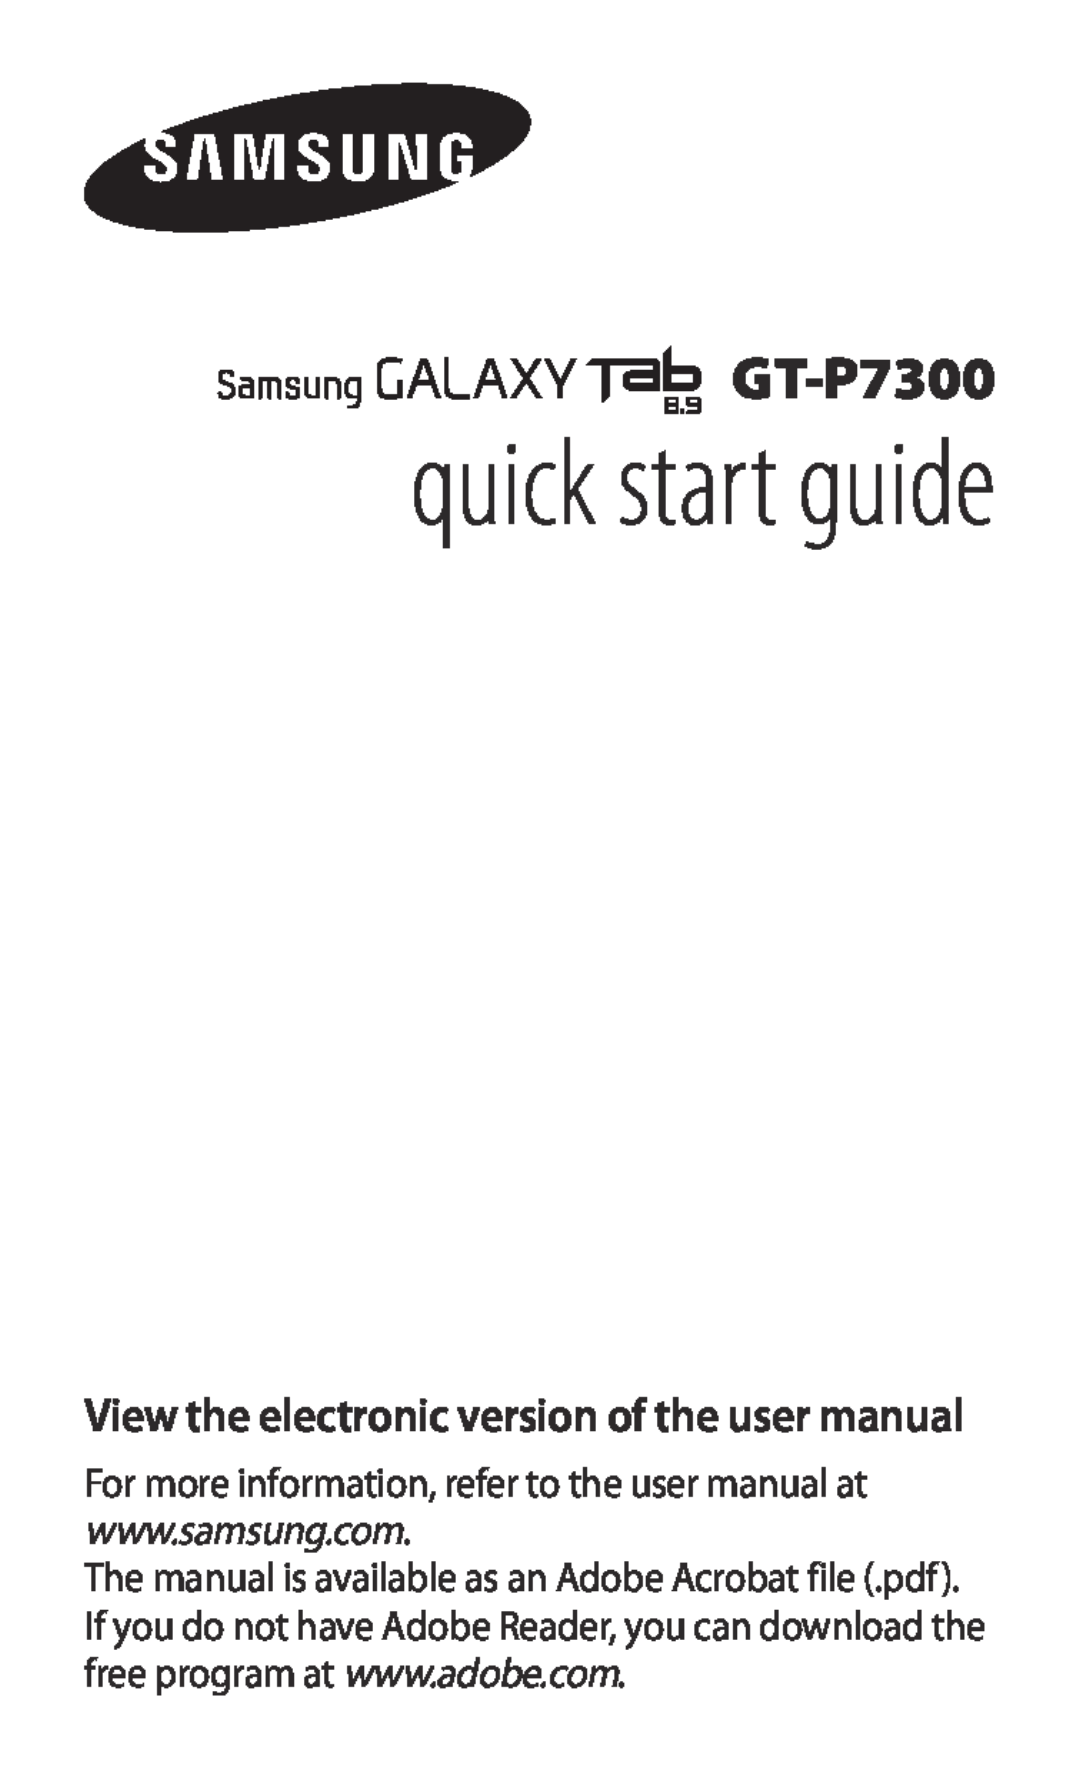 Samsung GT-P7300UWAAFR, GT-P7300FKAARB, GT-P7300FKEJED View the electronic version of the user manual, quick start guide 